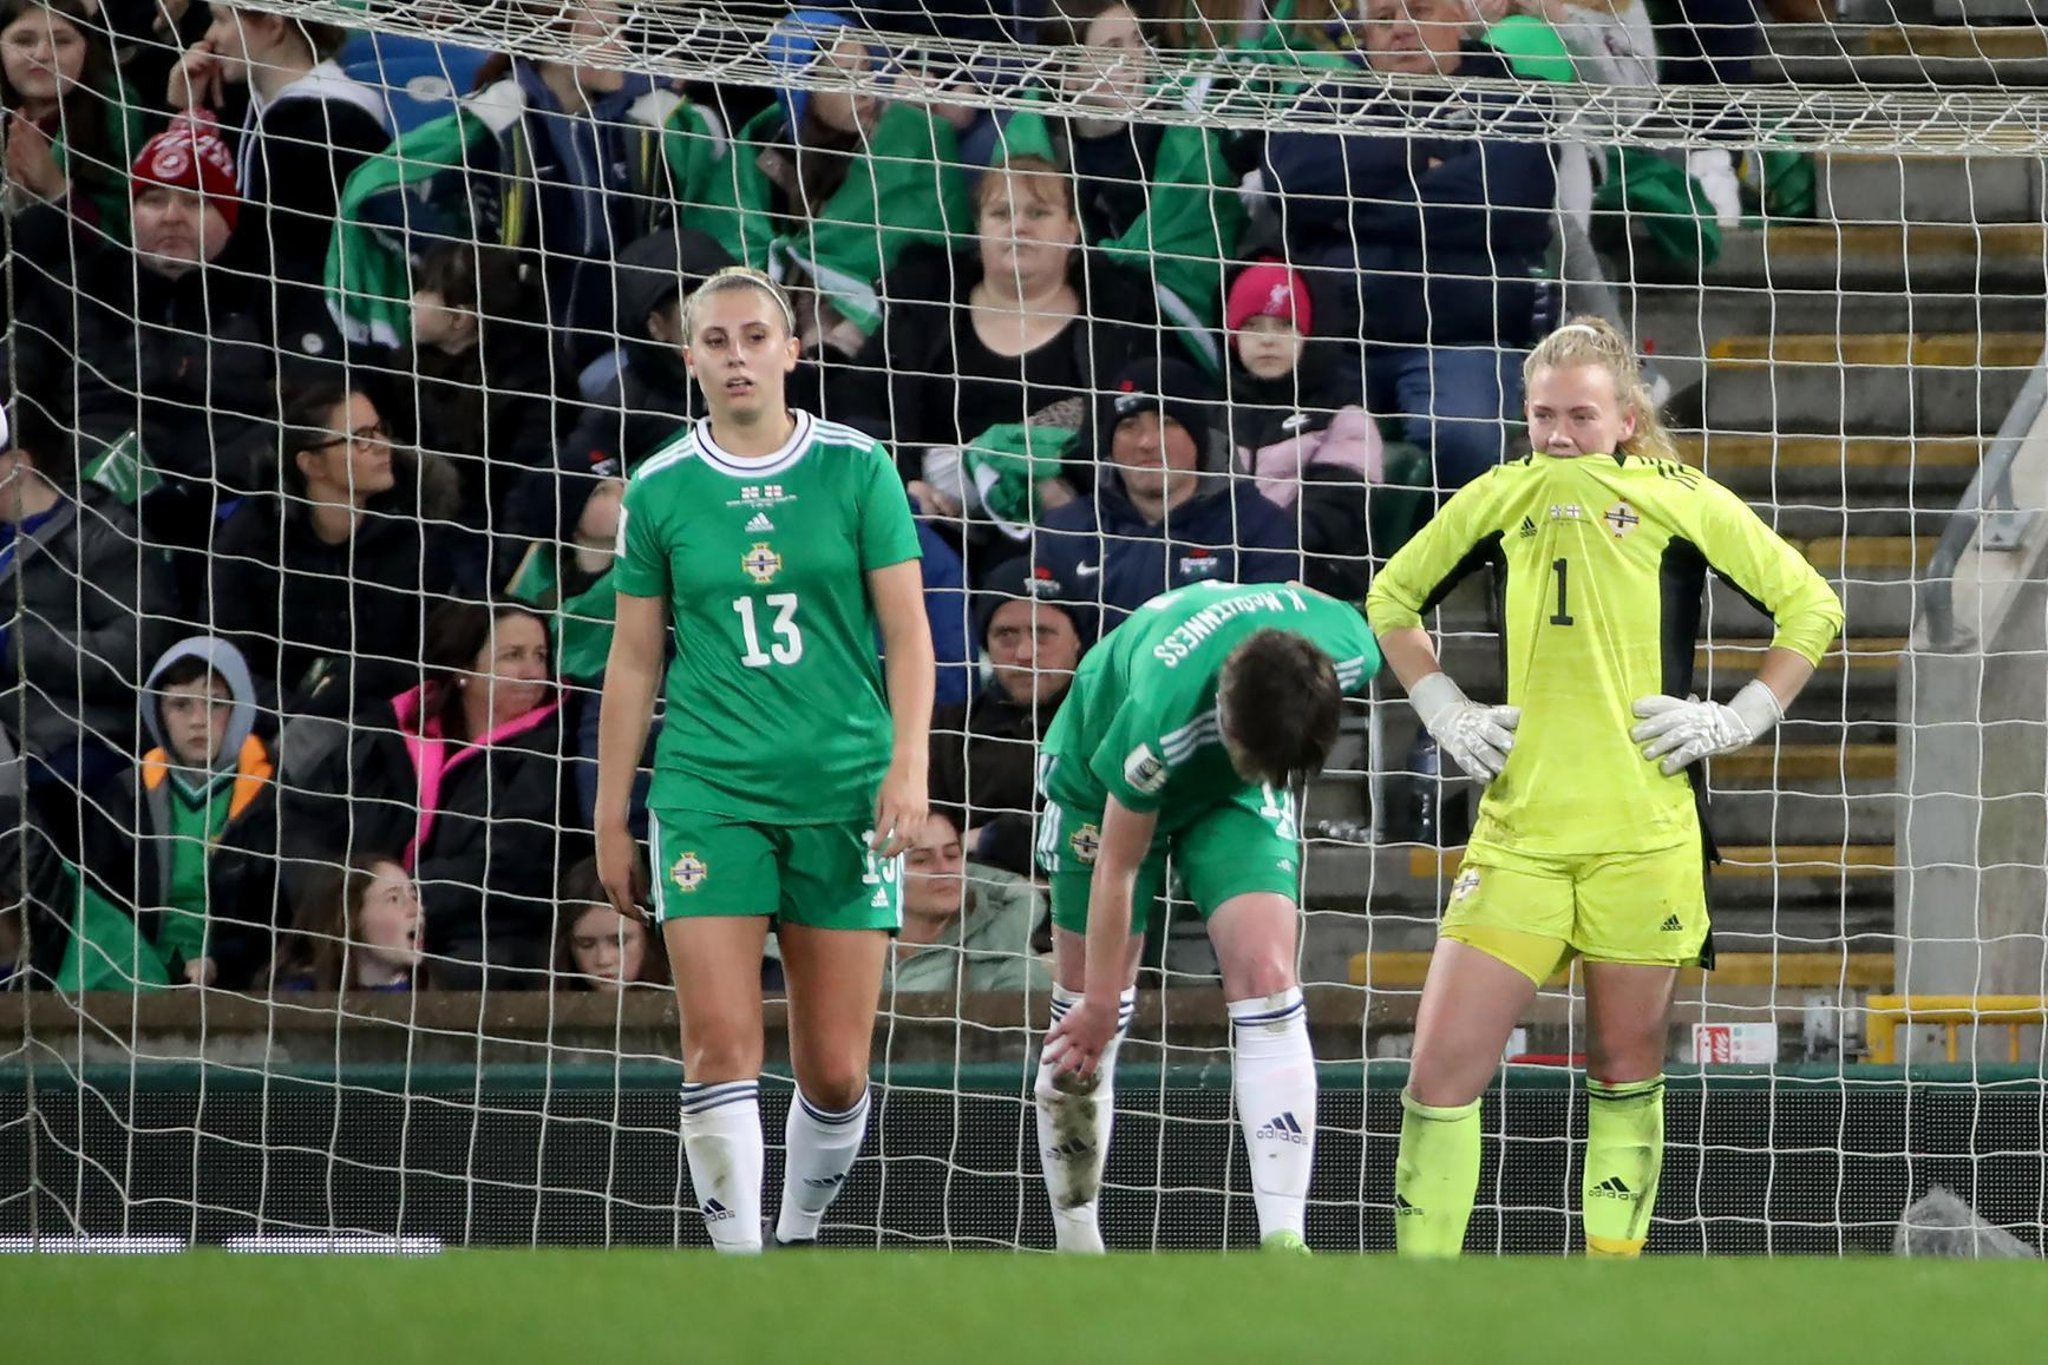 Heavy defeat for Northern Ireland as England on brink of World Cup qualification